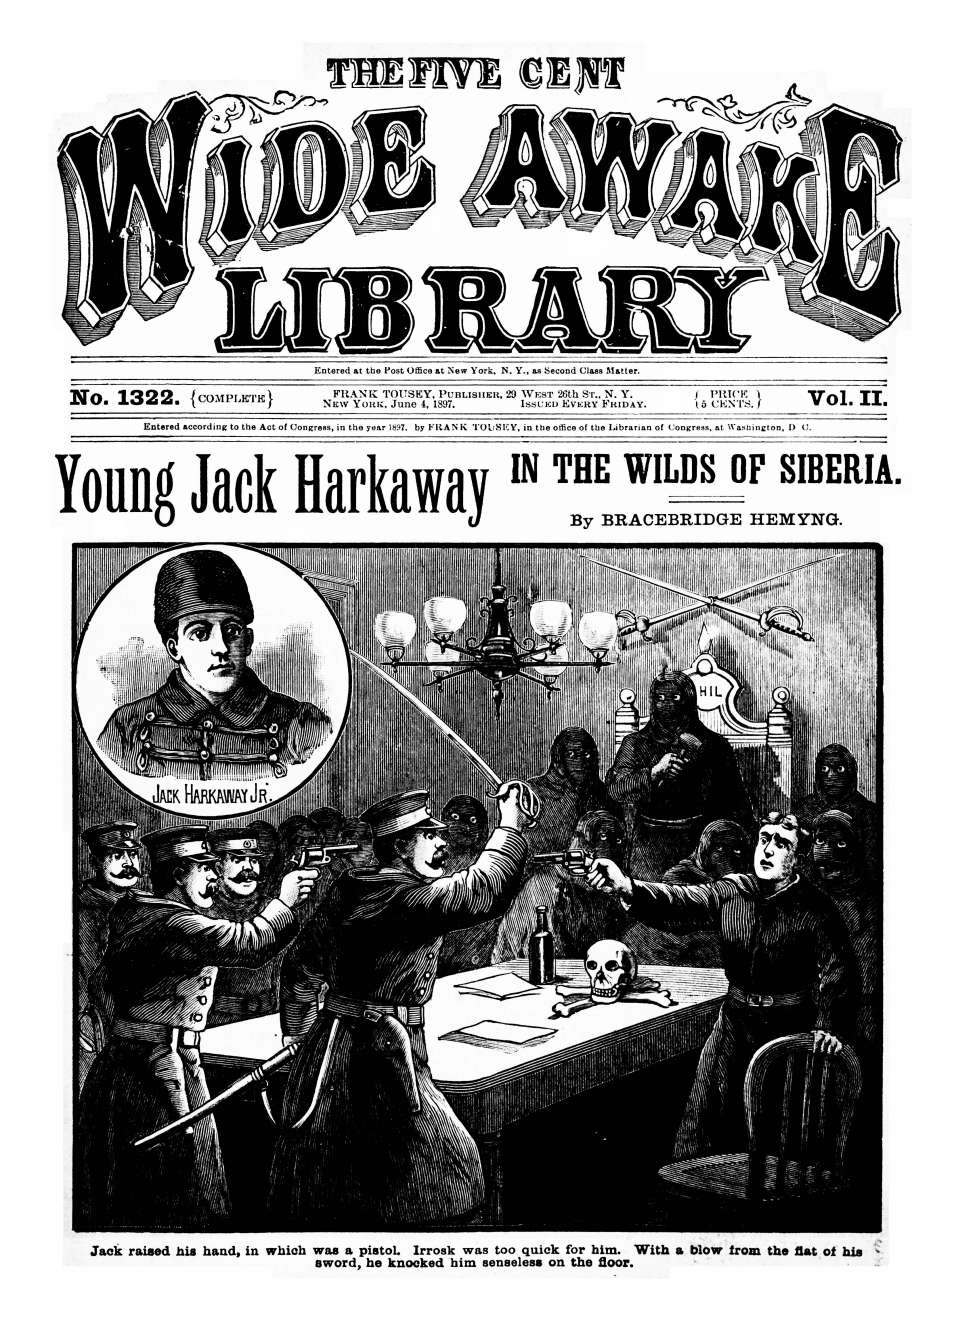 Book Cover For Five Cent Wide Awake Library v2 1322